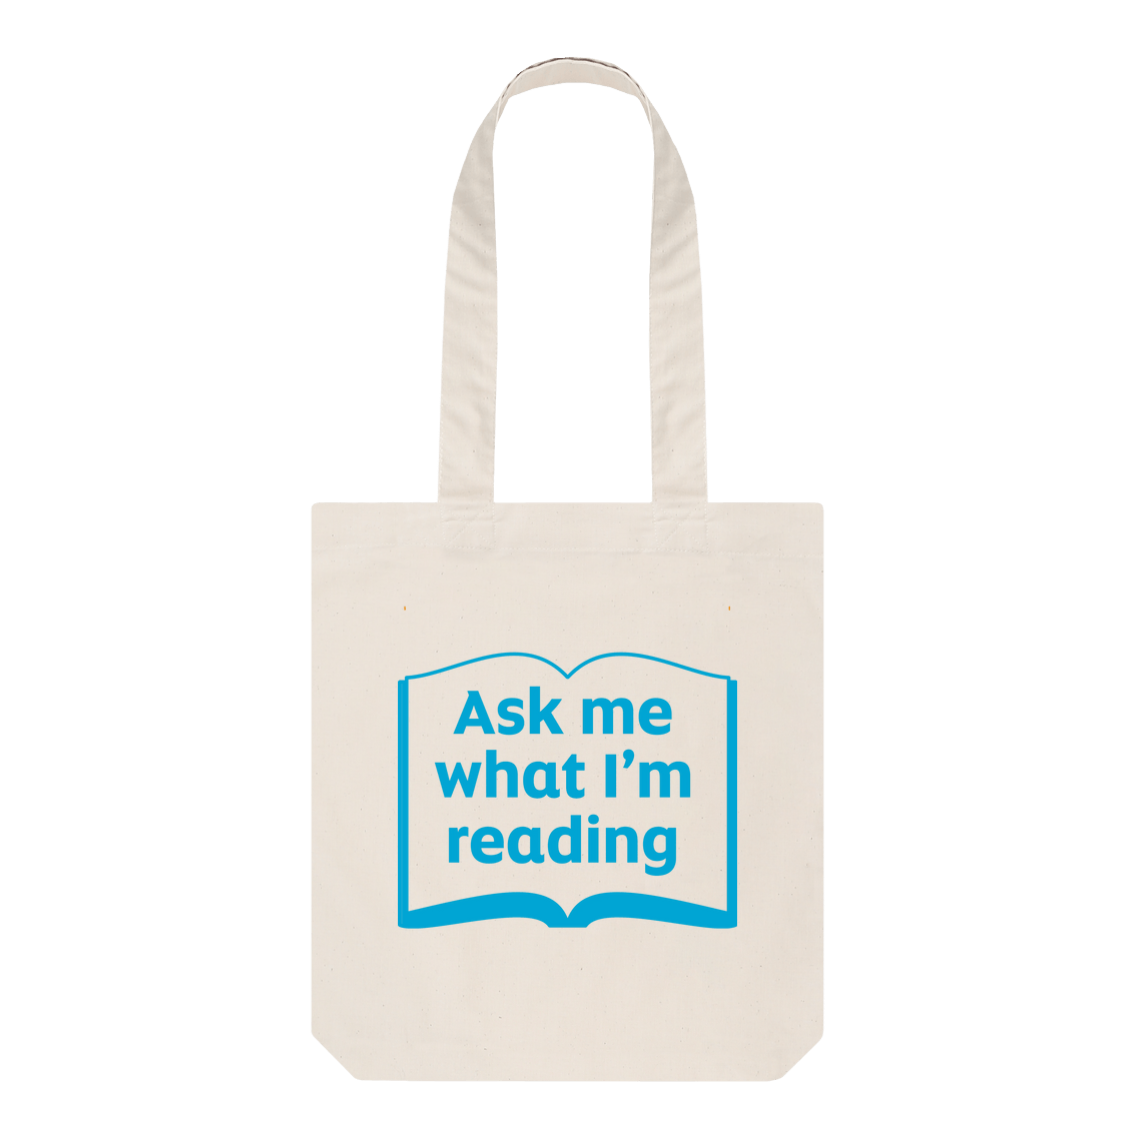 'Ask me what I am reading' tote bag